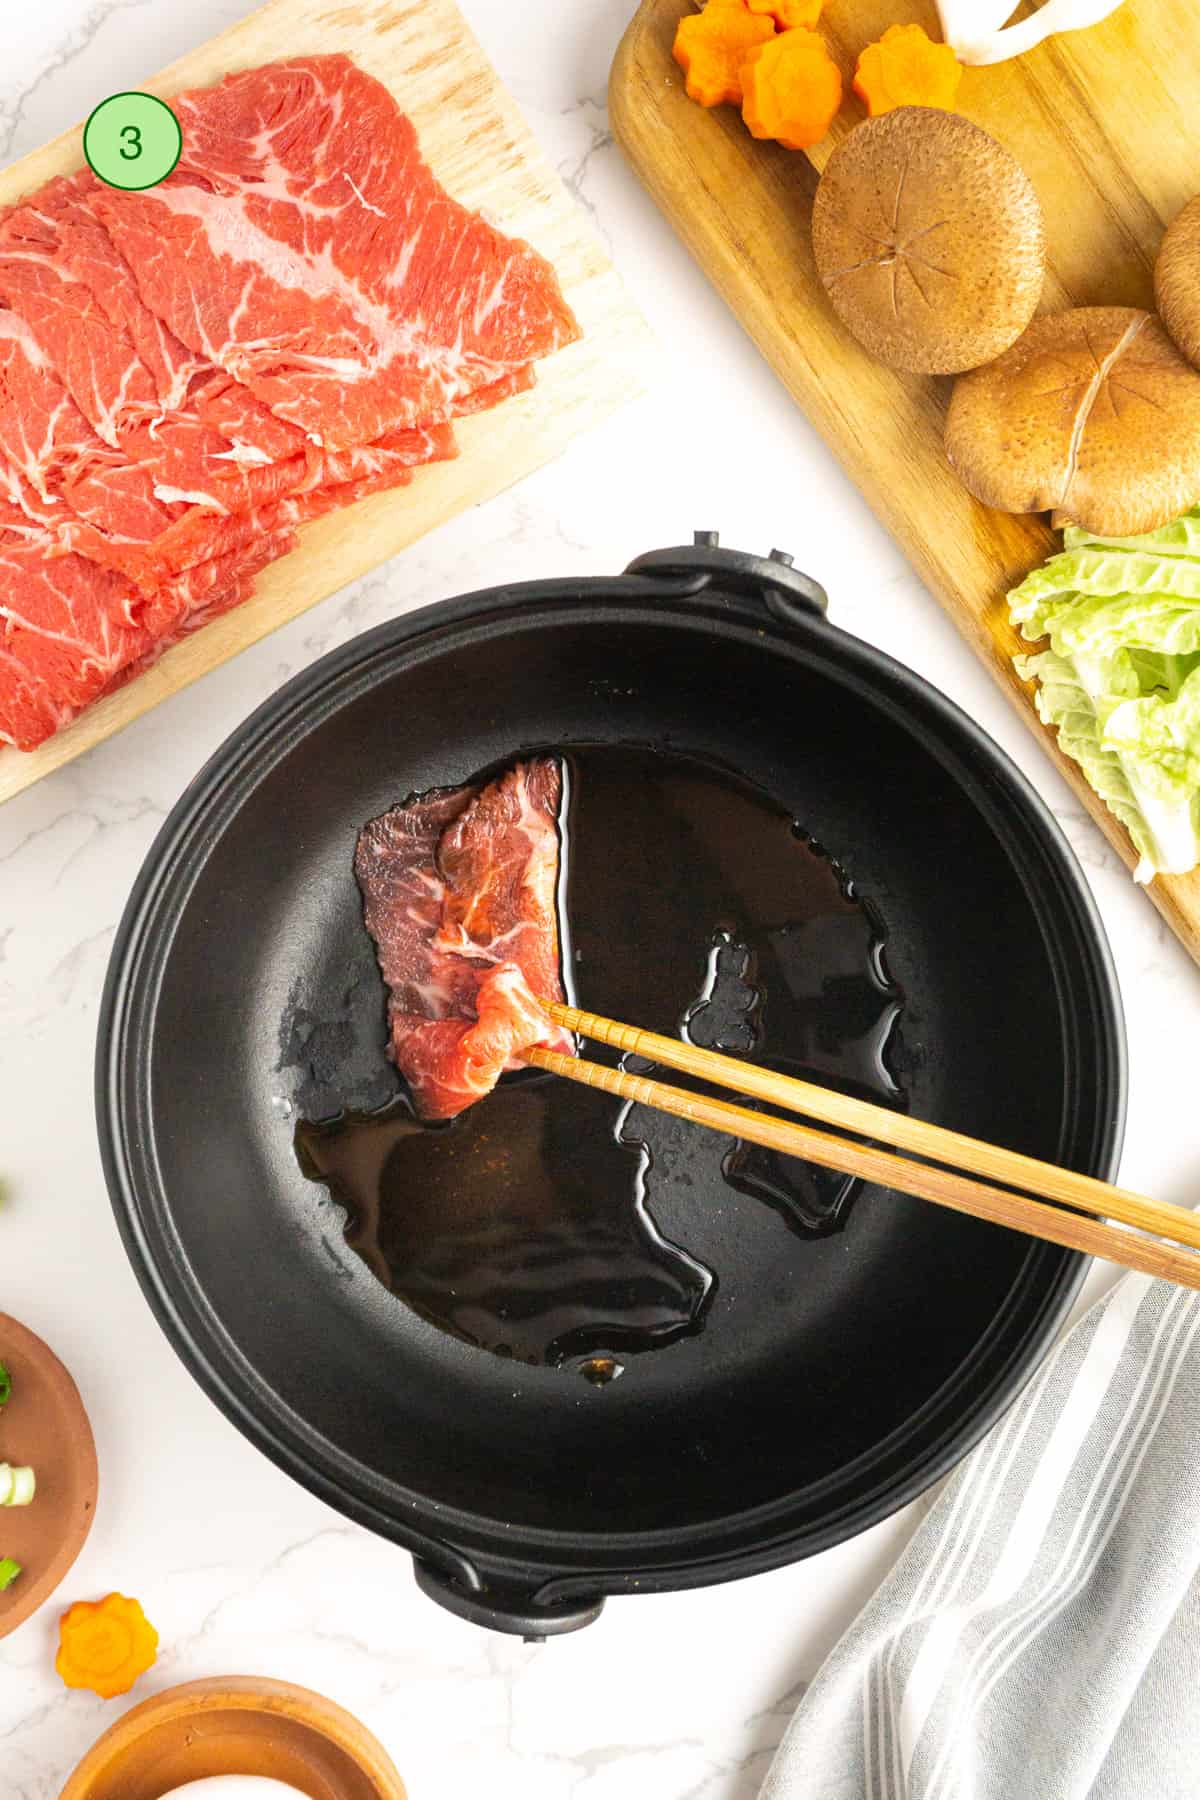 Cooking the beef slices in a cast iron pot.